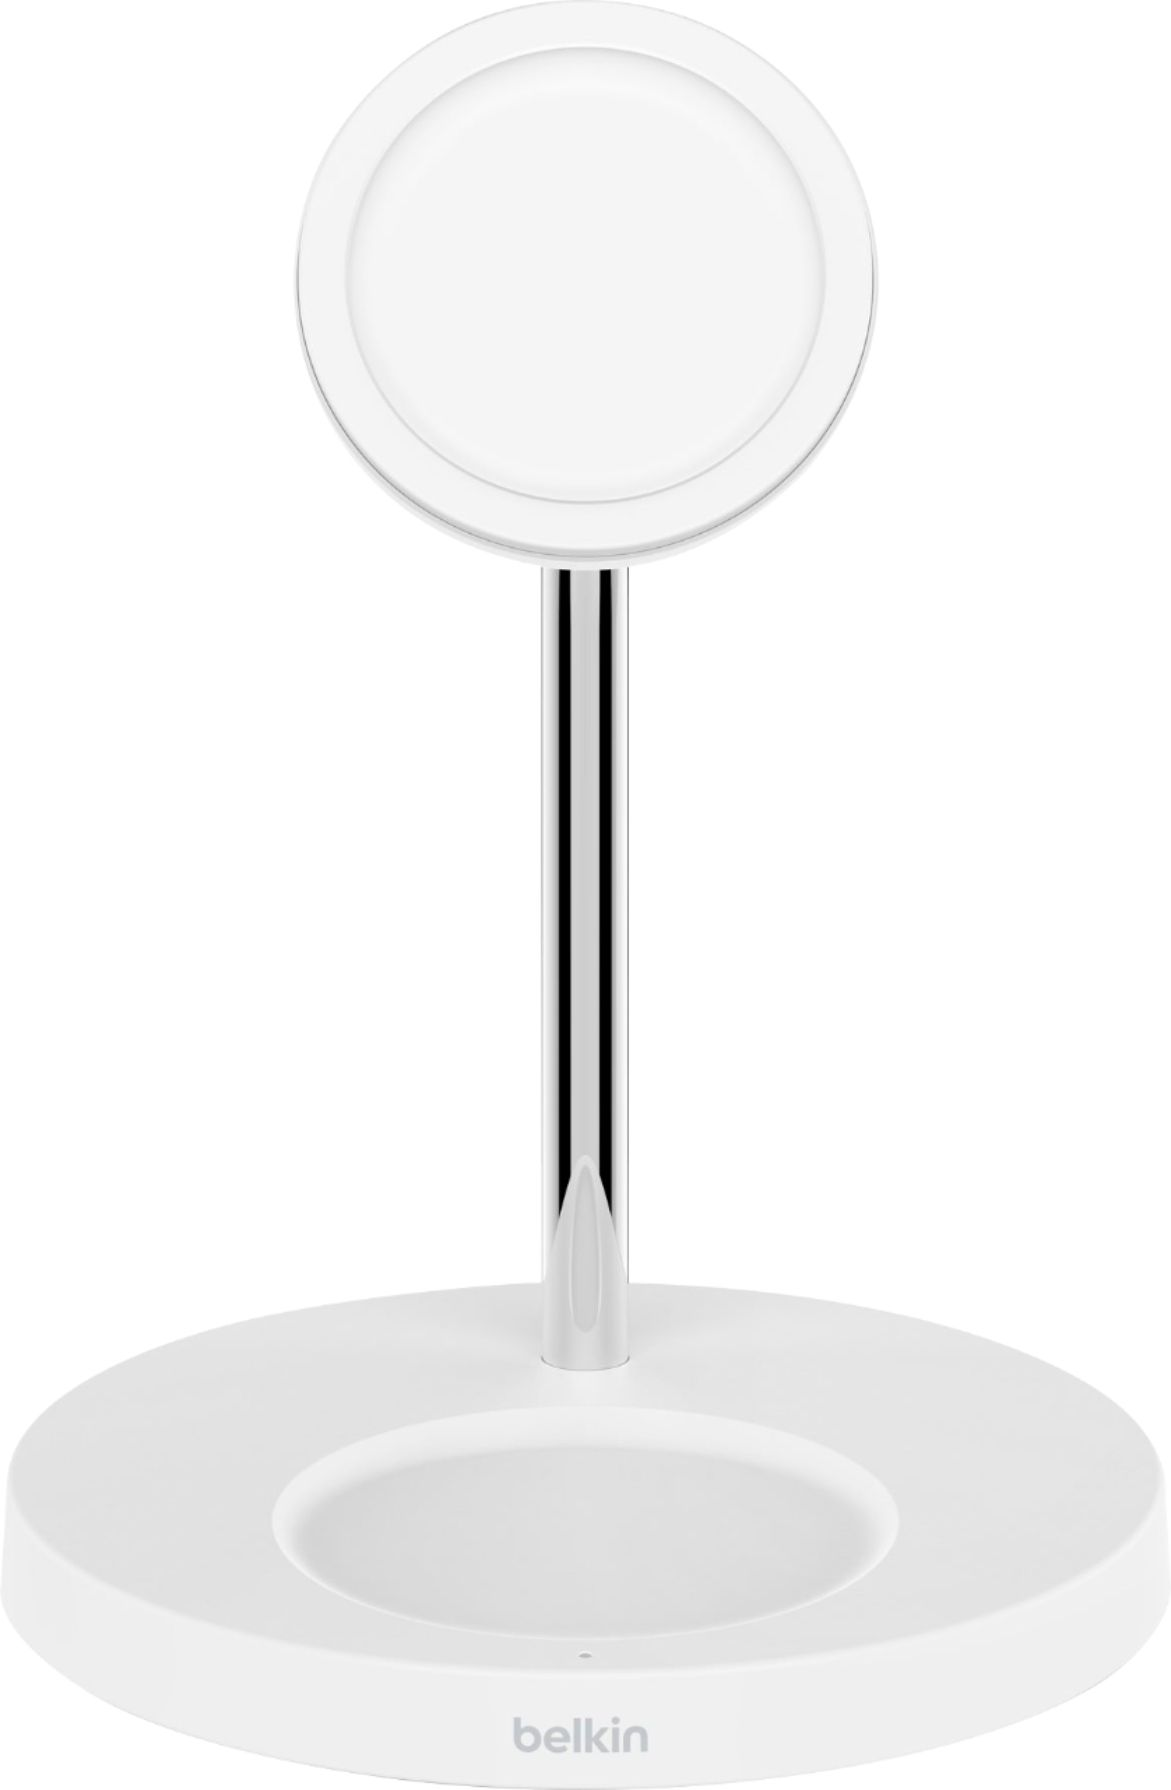 Belkin - BoostCharge Pro 2-in-1 Wireless Charger Stand with MagSafe for iPhone 13, iPhone 13 Pro, iPhone 12 and iPhone 12 Pro - White